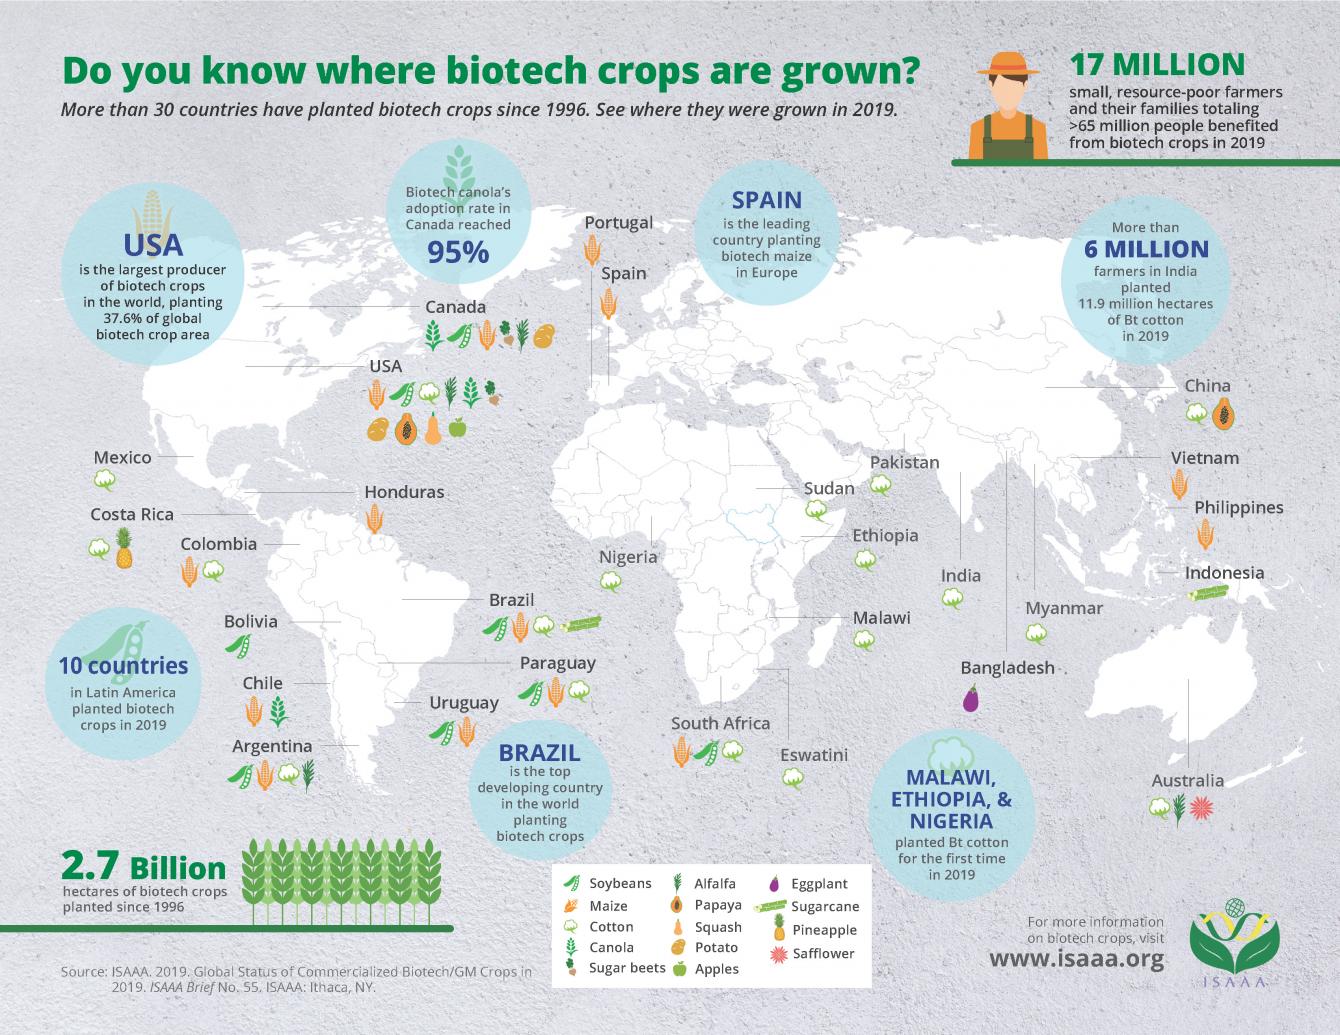 Where Biotech Crops are Grown